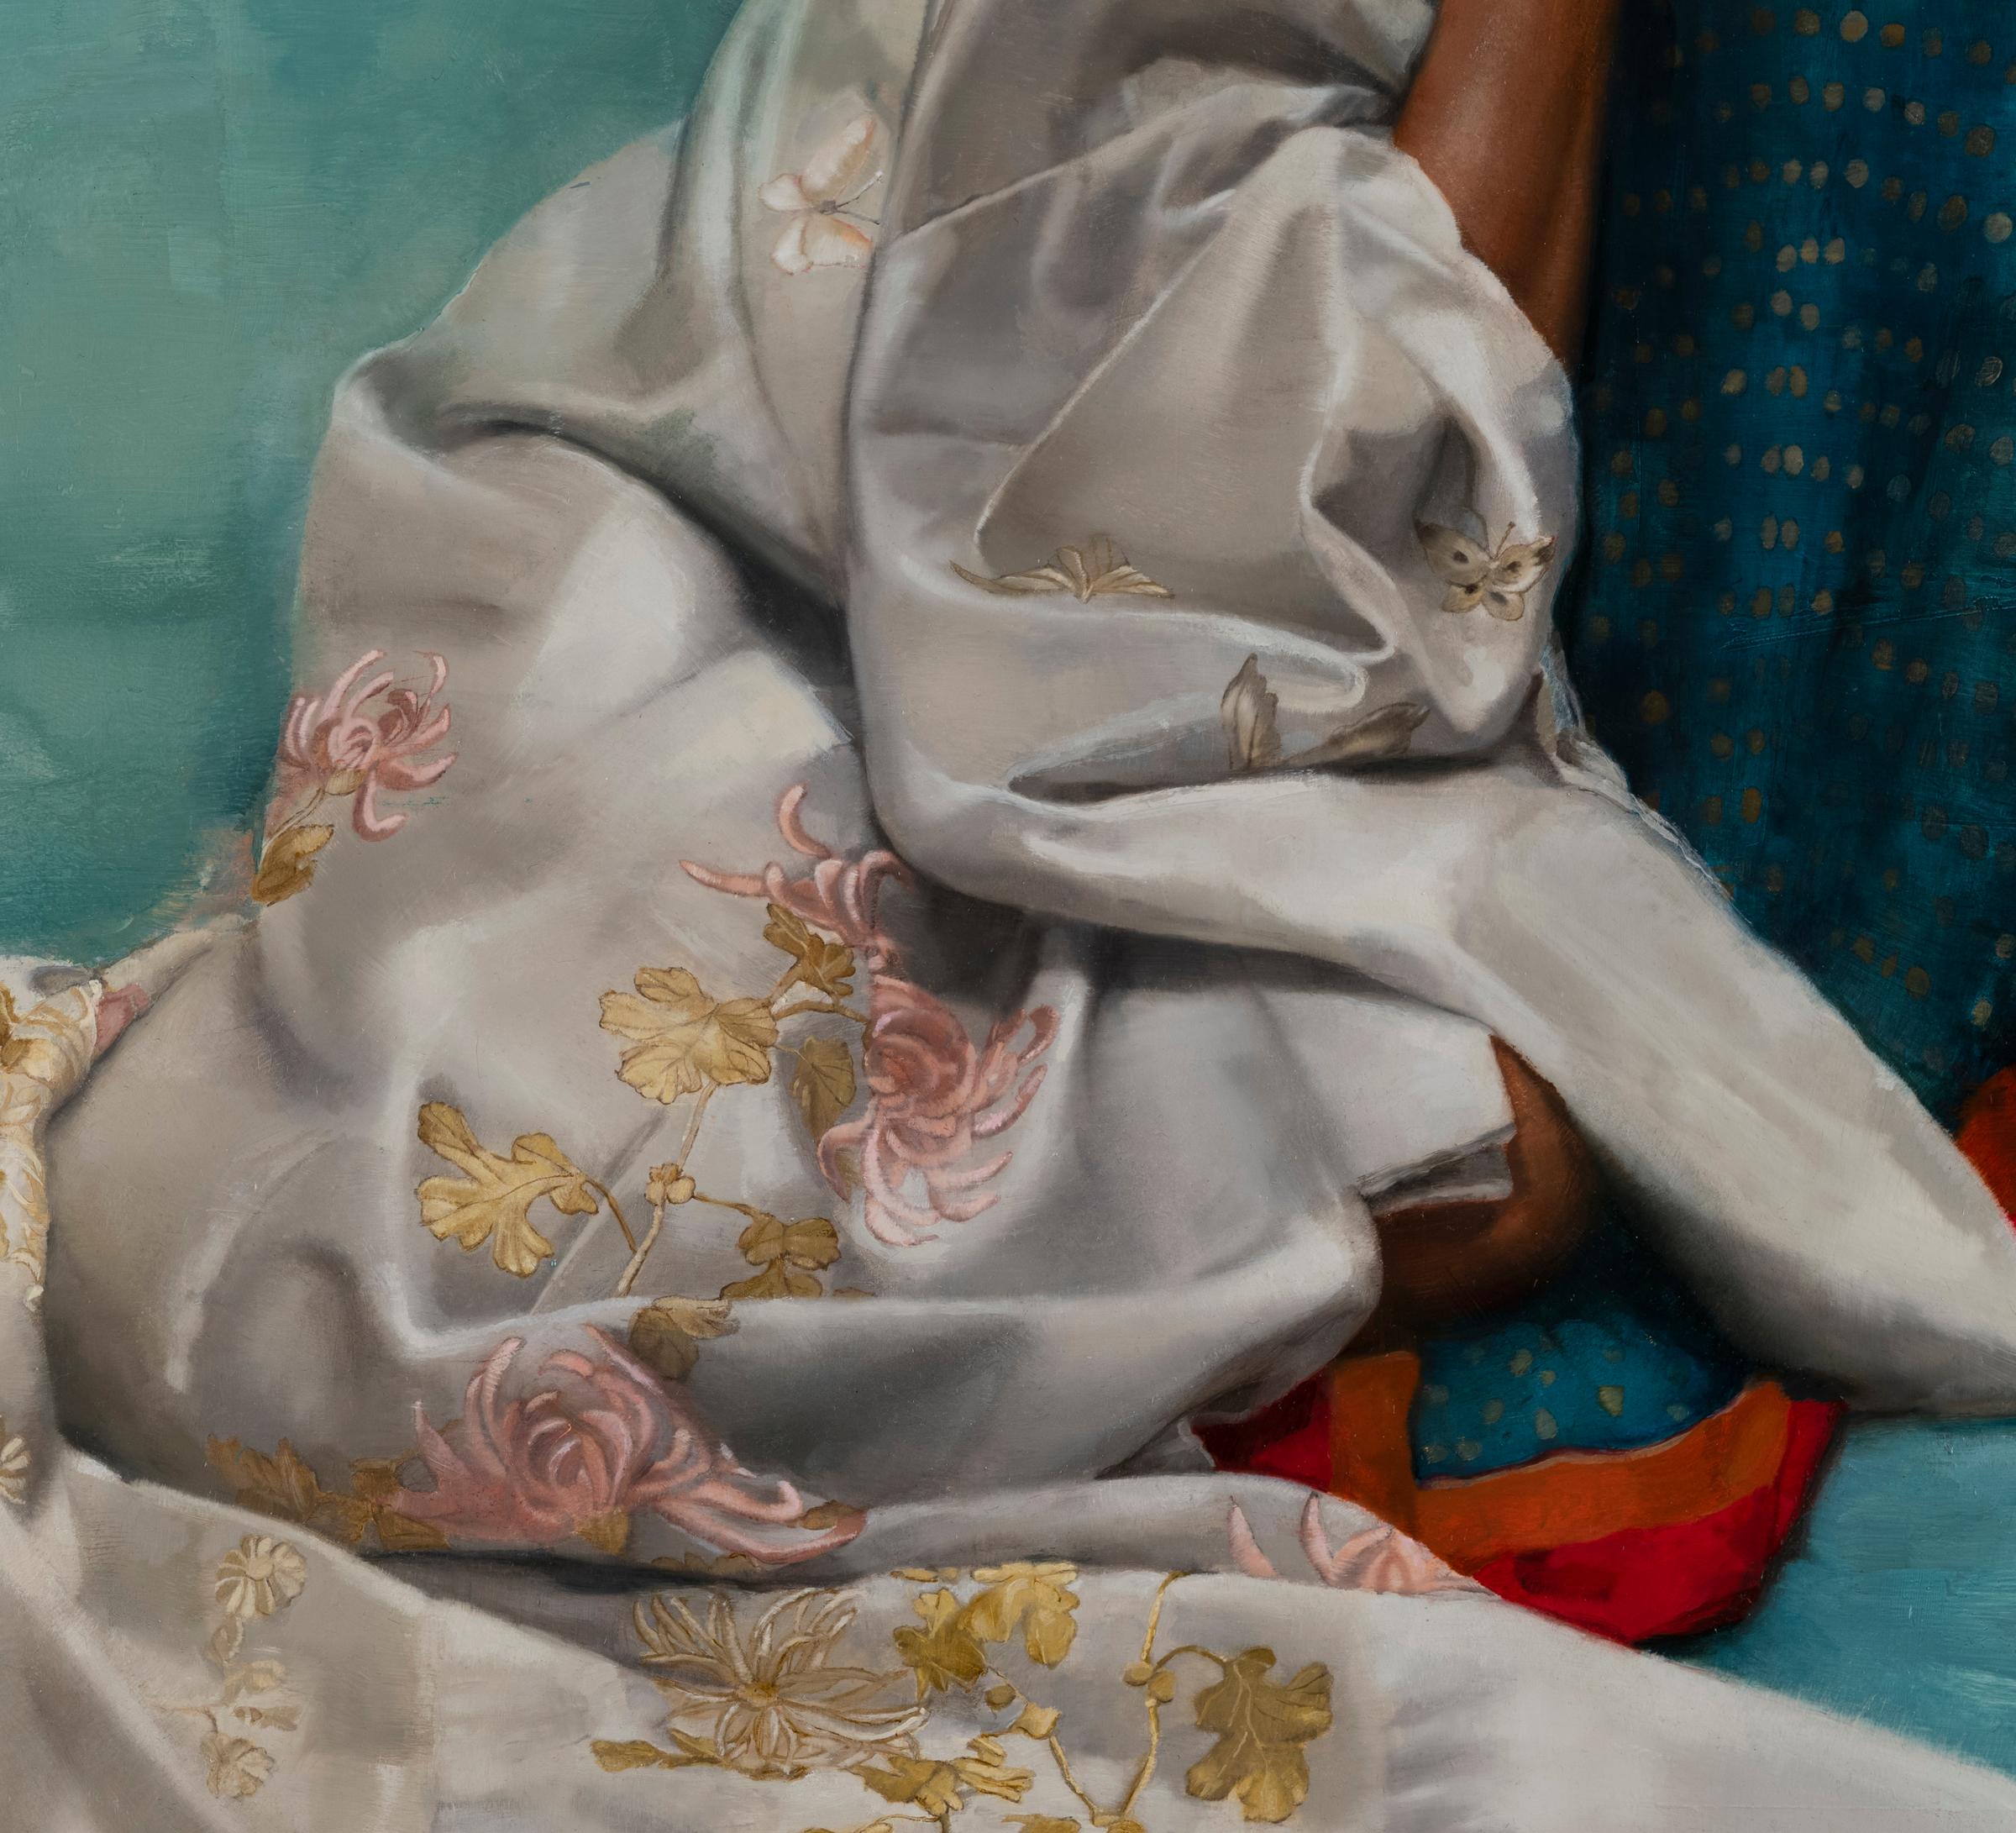 ANGLE OF REPOSE, figurative painting, figure sitting, lush color, vivid detail - Contemporary Painting by Sharon Sprung